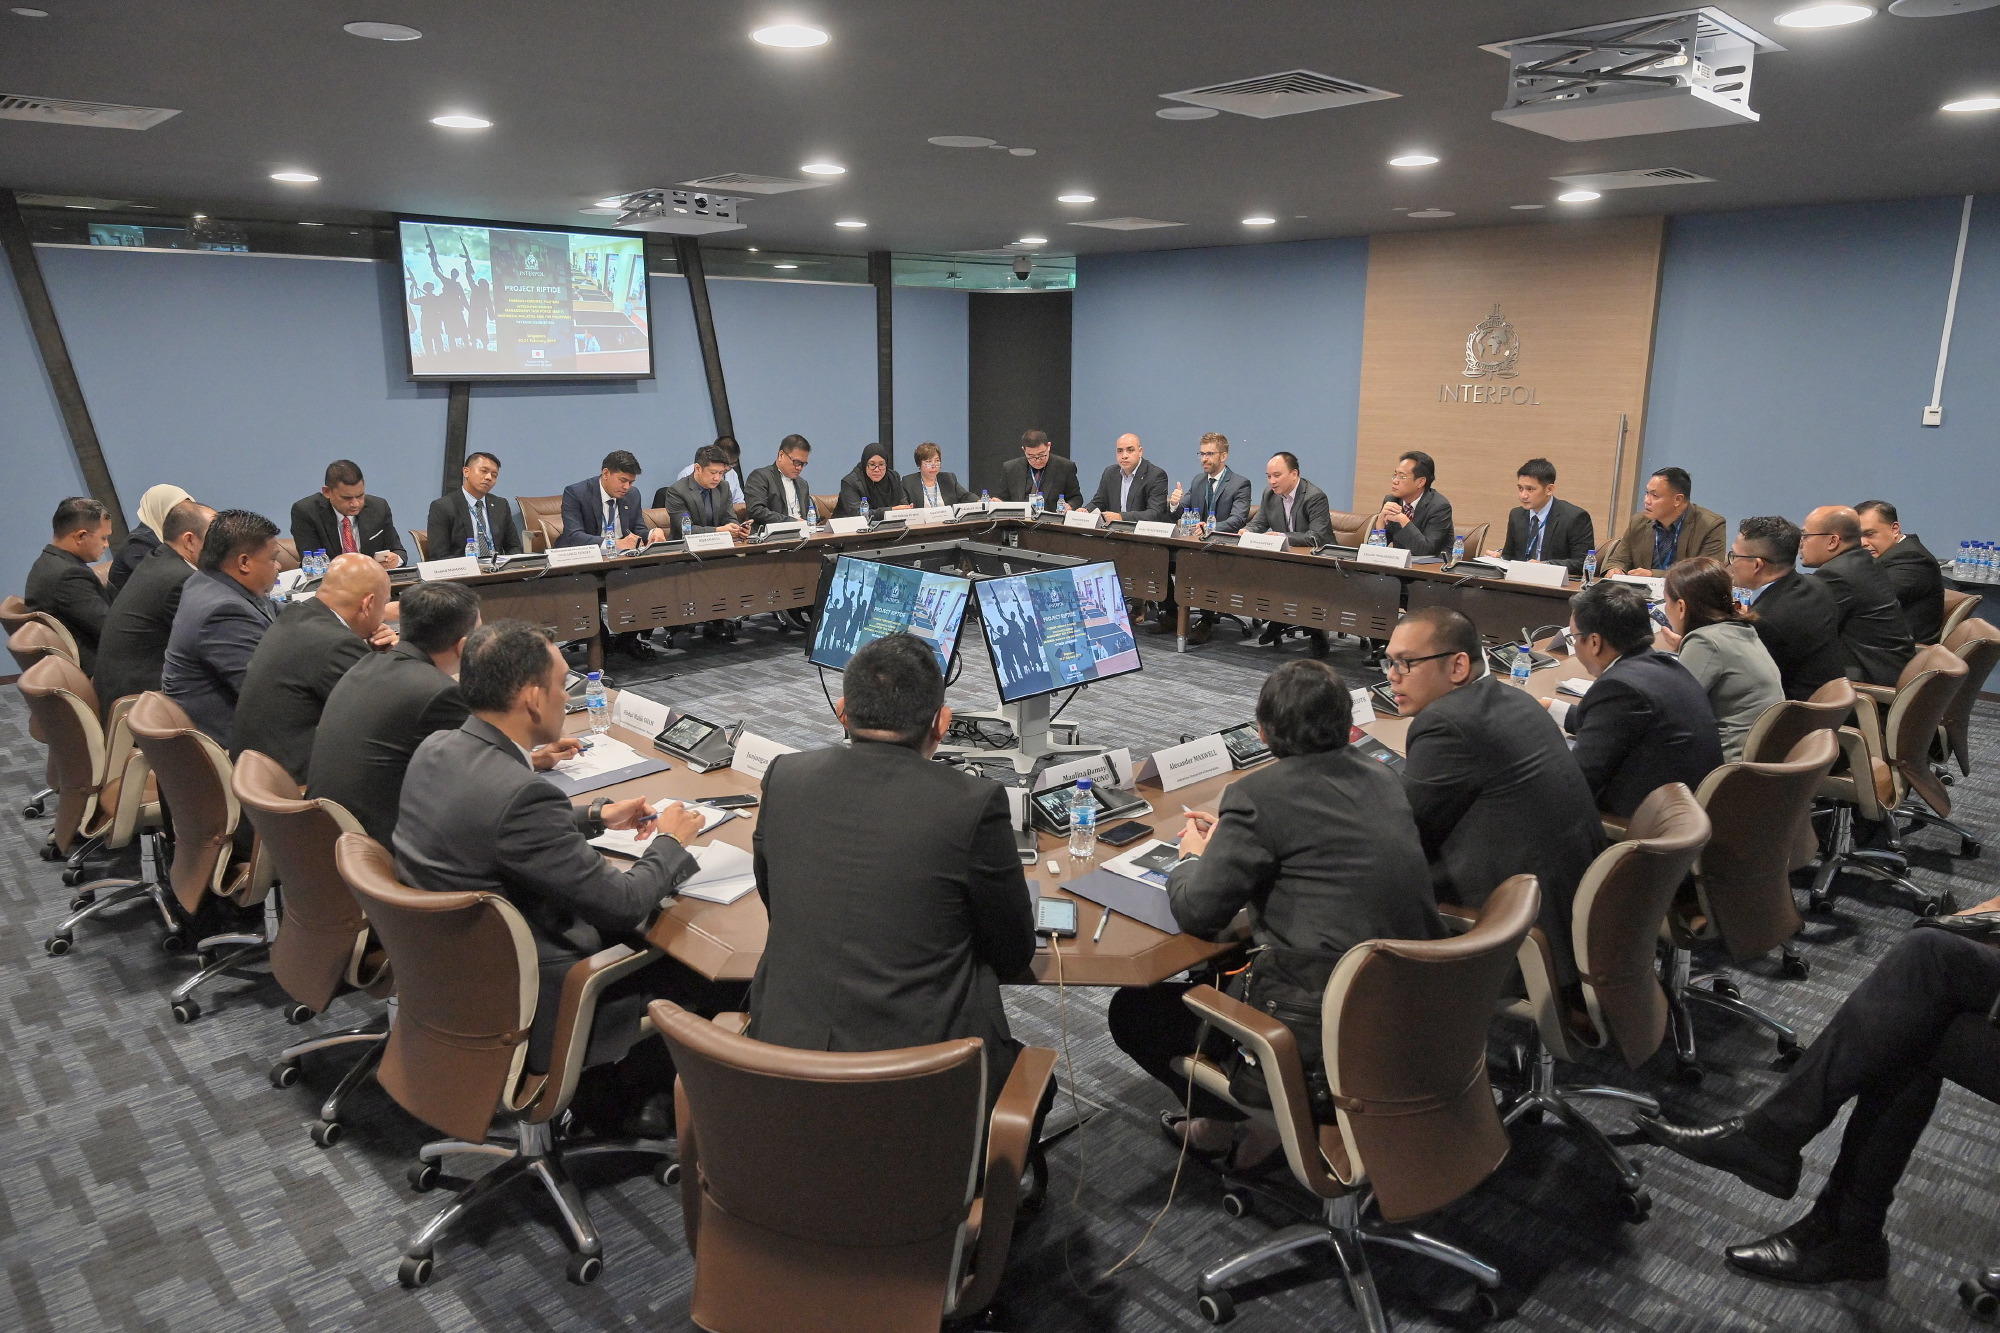 A debriefing meeting of Project Riptide, an INTERPOL Integrated Border Management Task Force project on Foreign Terrorist Fighters (FTFs) in Indonesia, Malaysia and the Philippines, gathered 26 participants from the three countries to review the evolving challenges of FTF movement.